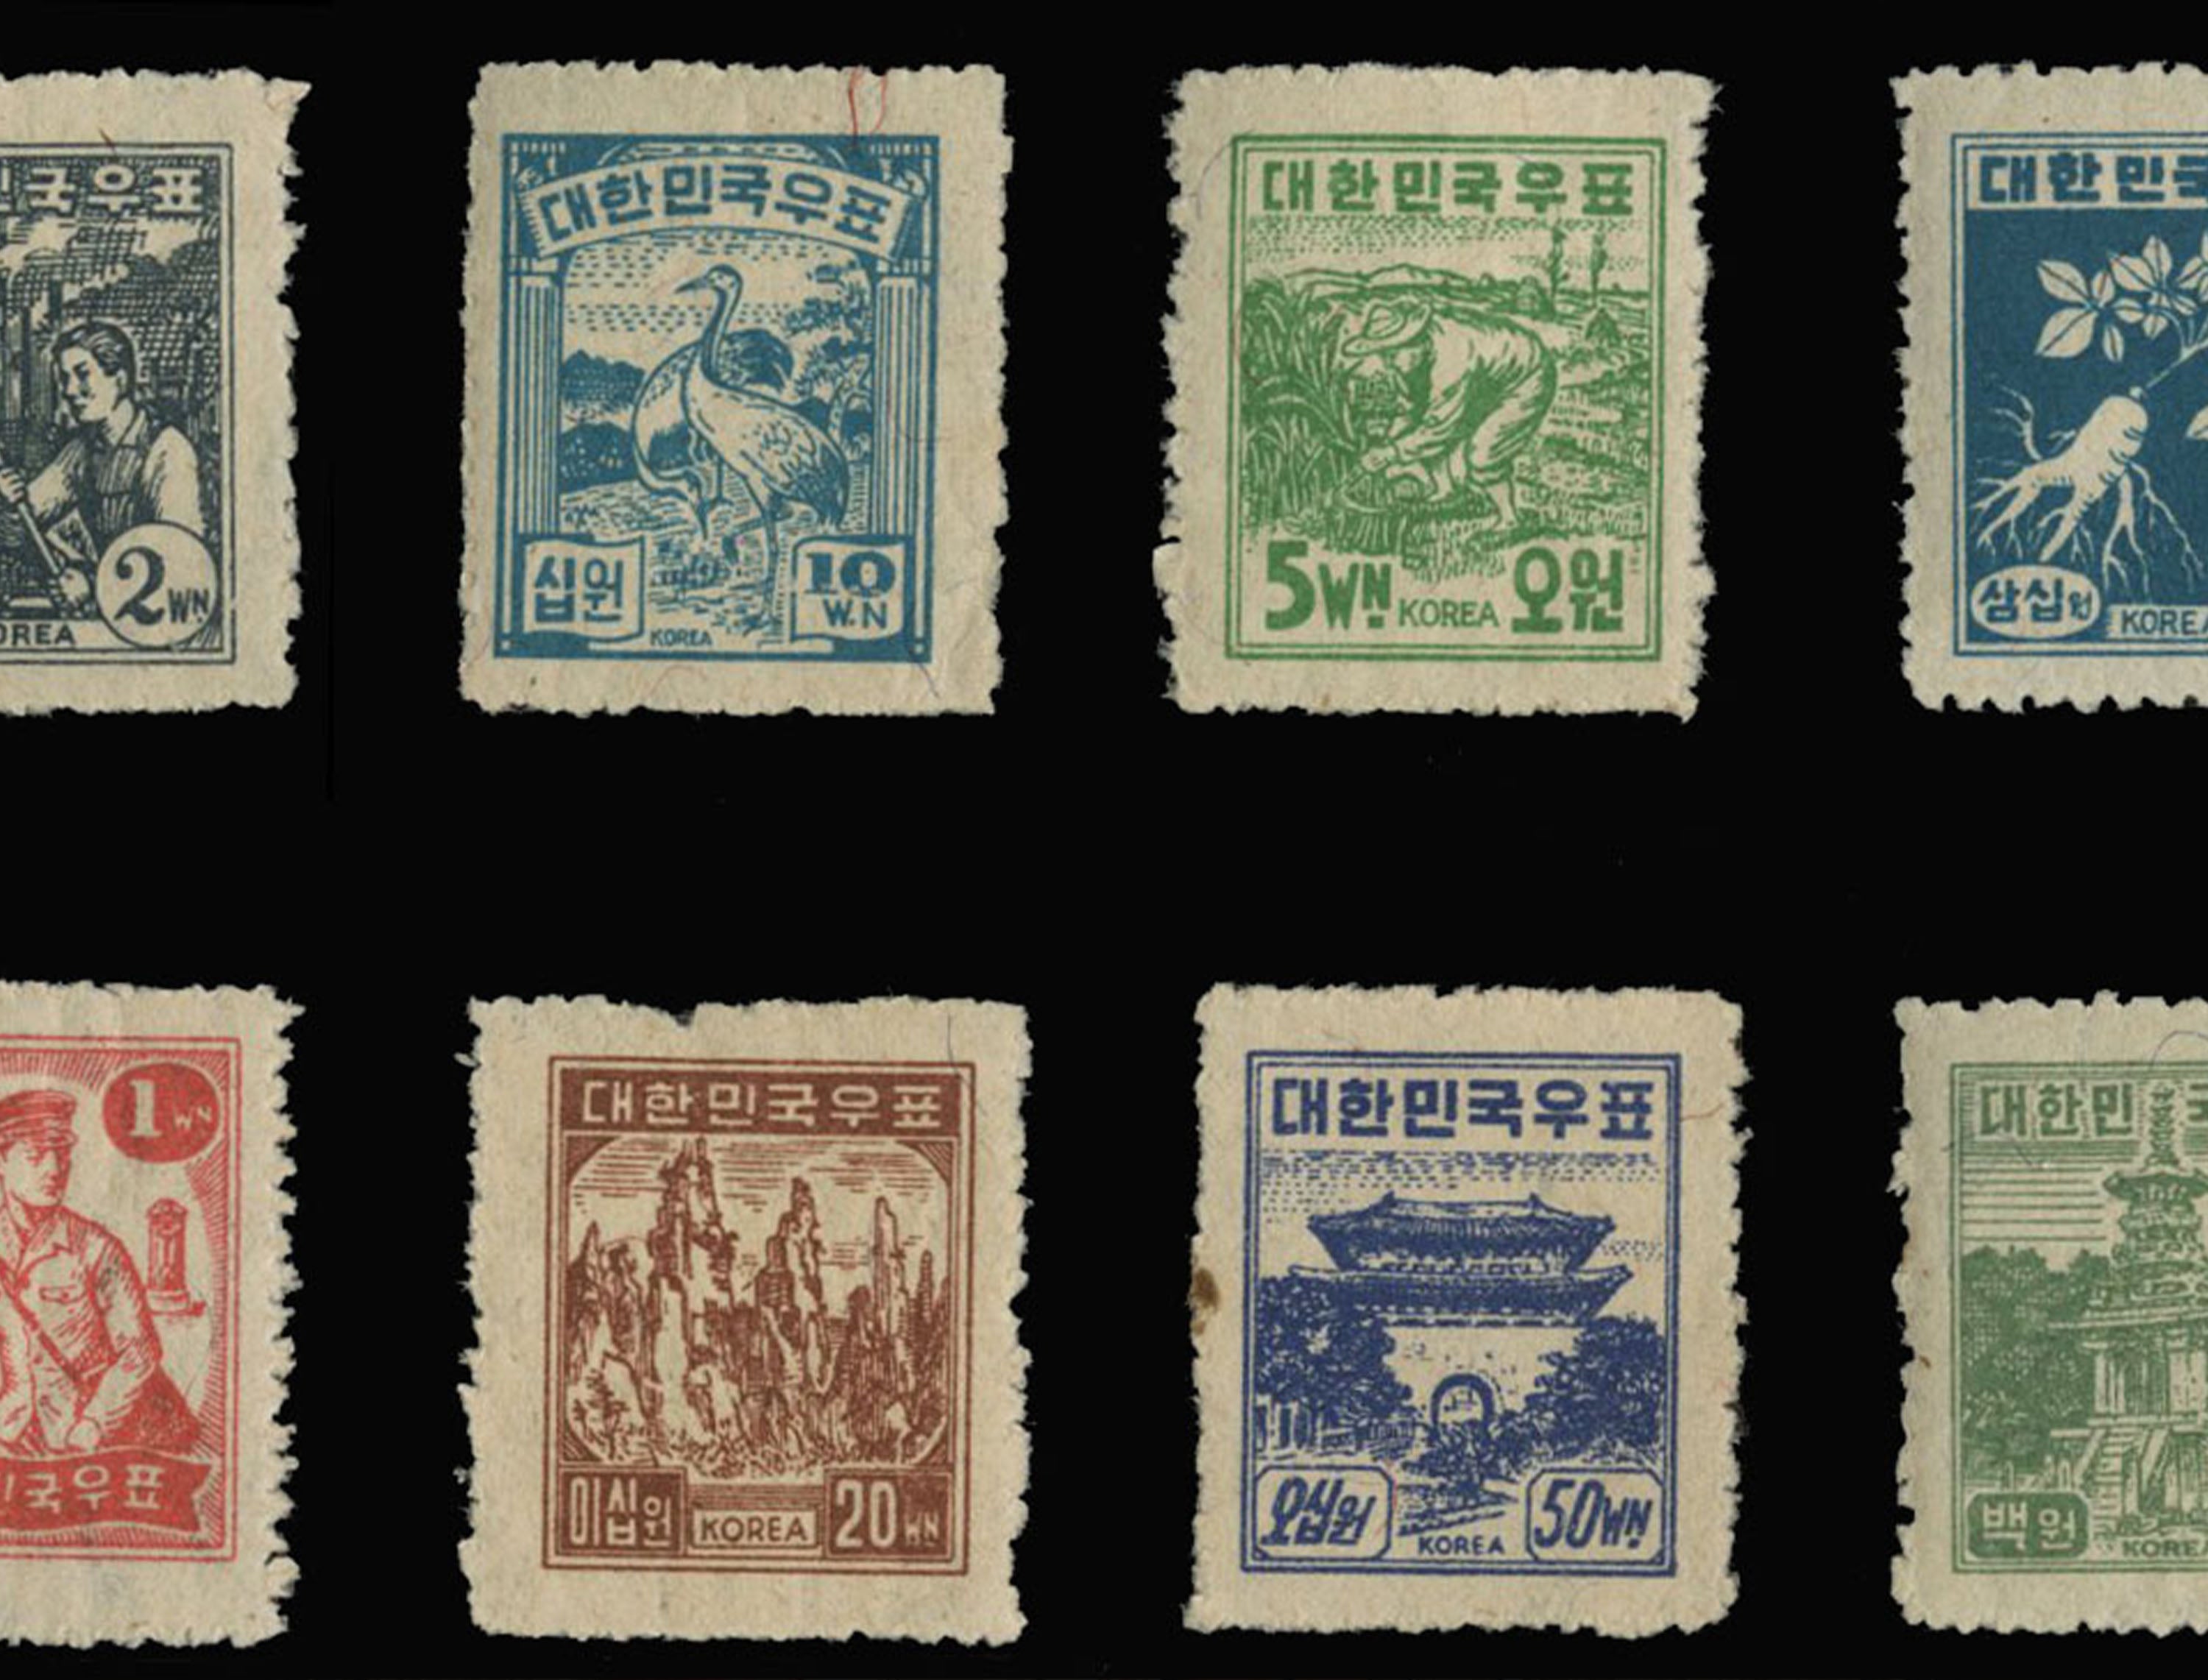 A Letter To Remember: Korea’s History Told Through Its Stamps